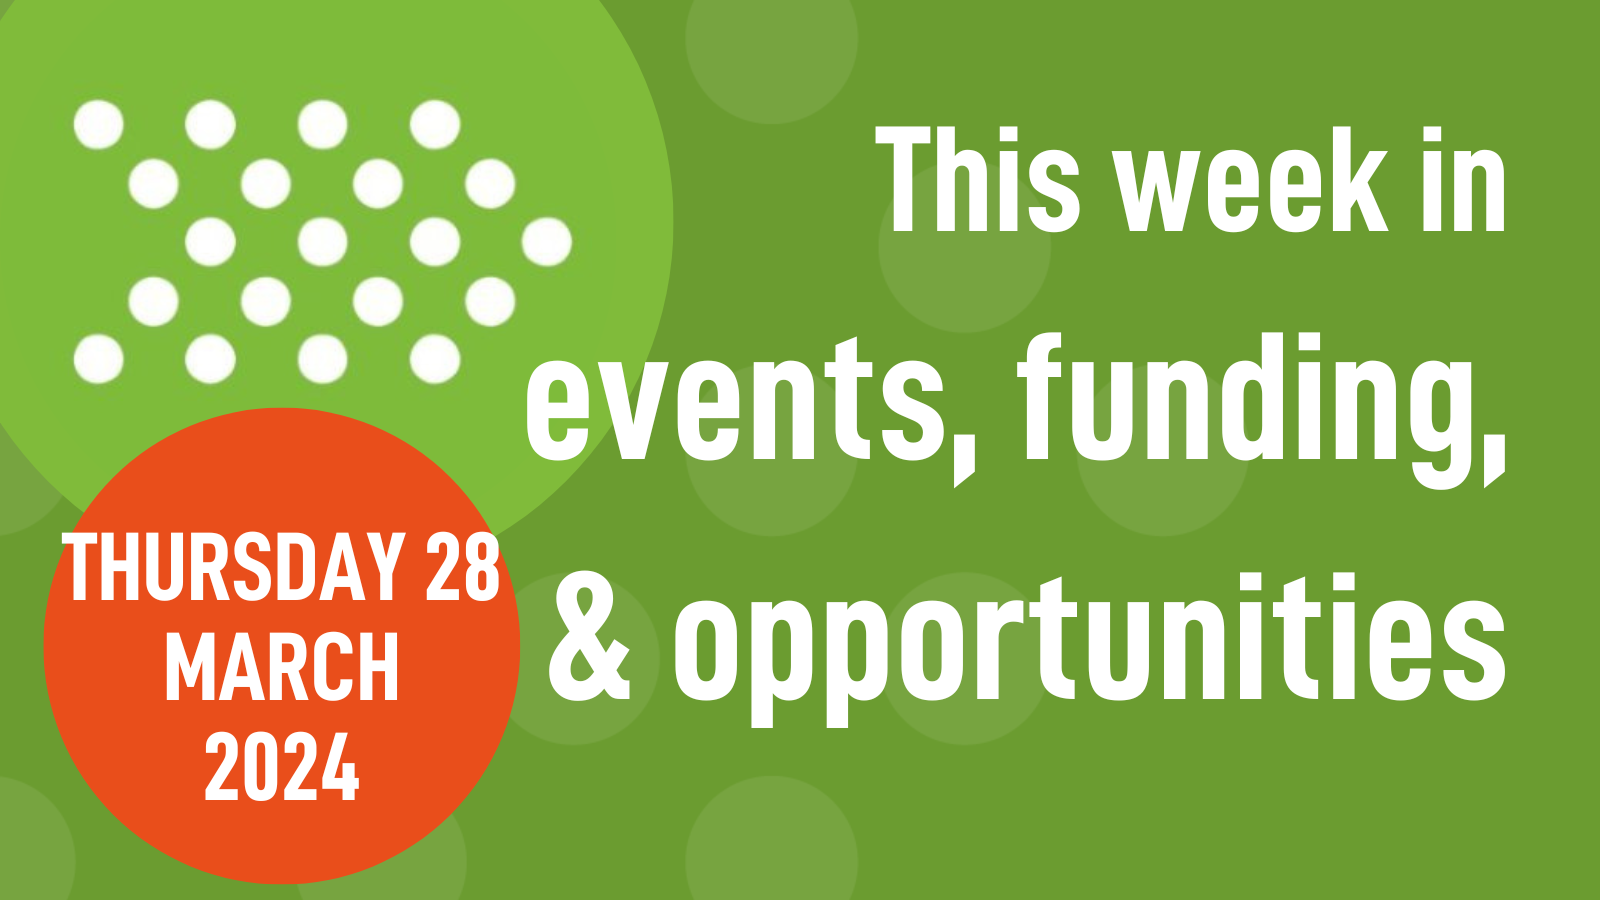 Weekly roundup 28/03/24: events, funding, & opportunities in mental health research